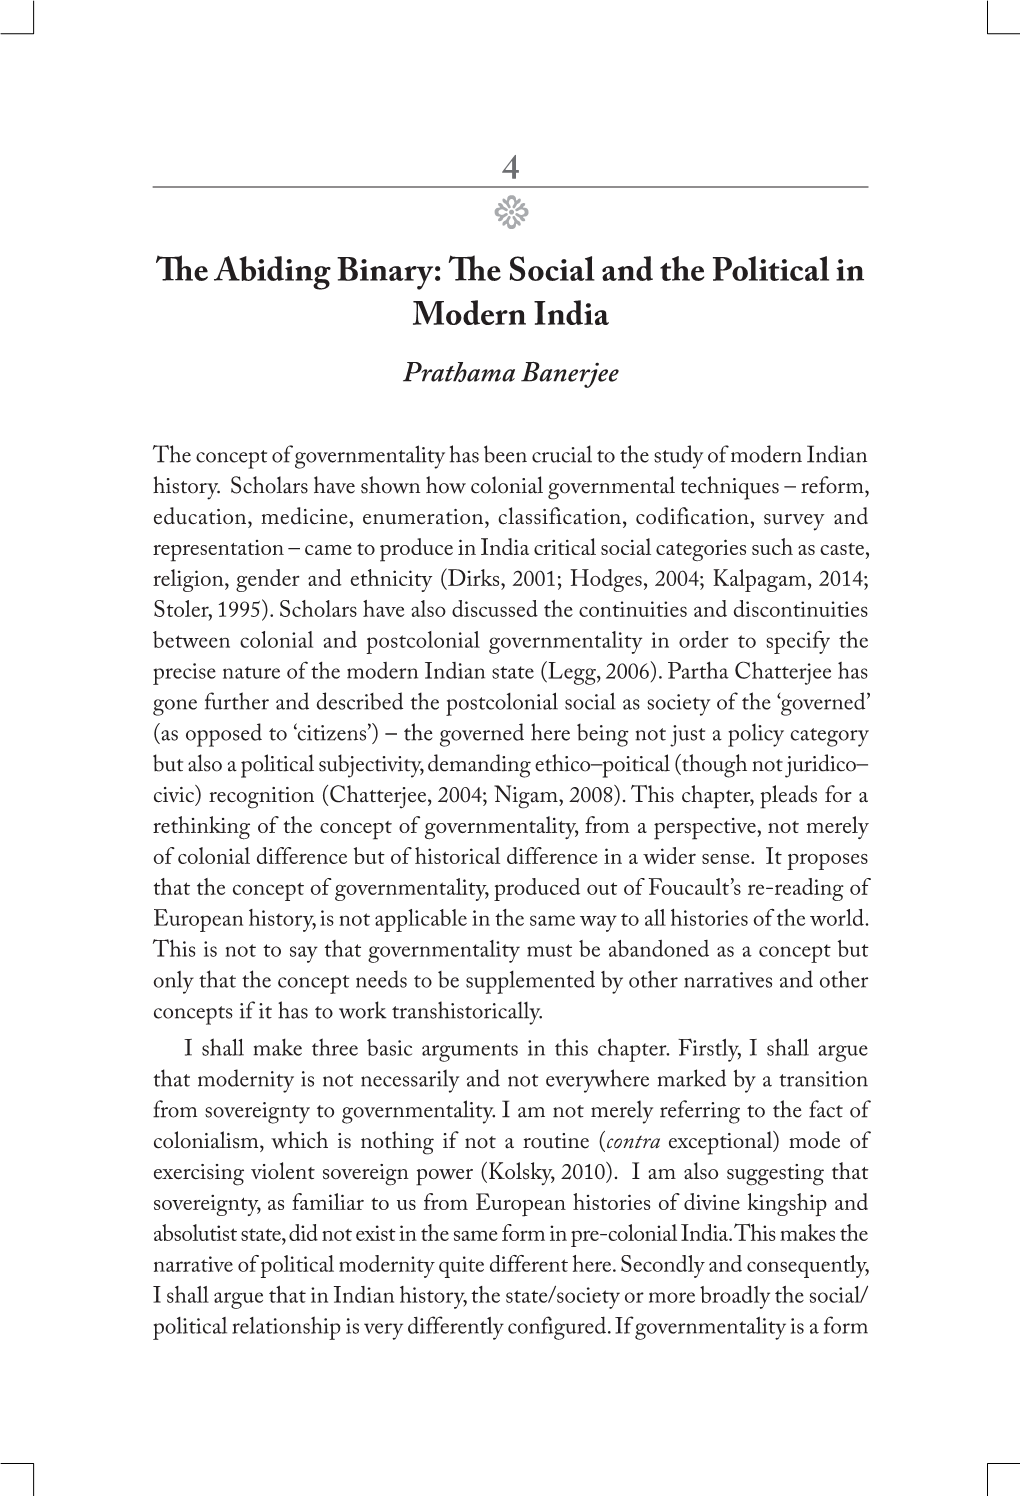 The Abiding Binary: the Social and the Political in Modern India Prathama Banerjee